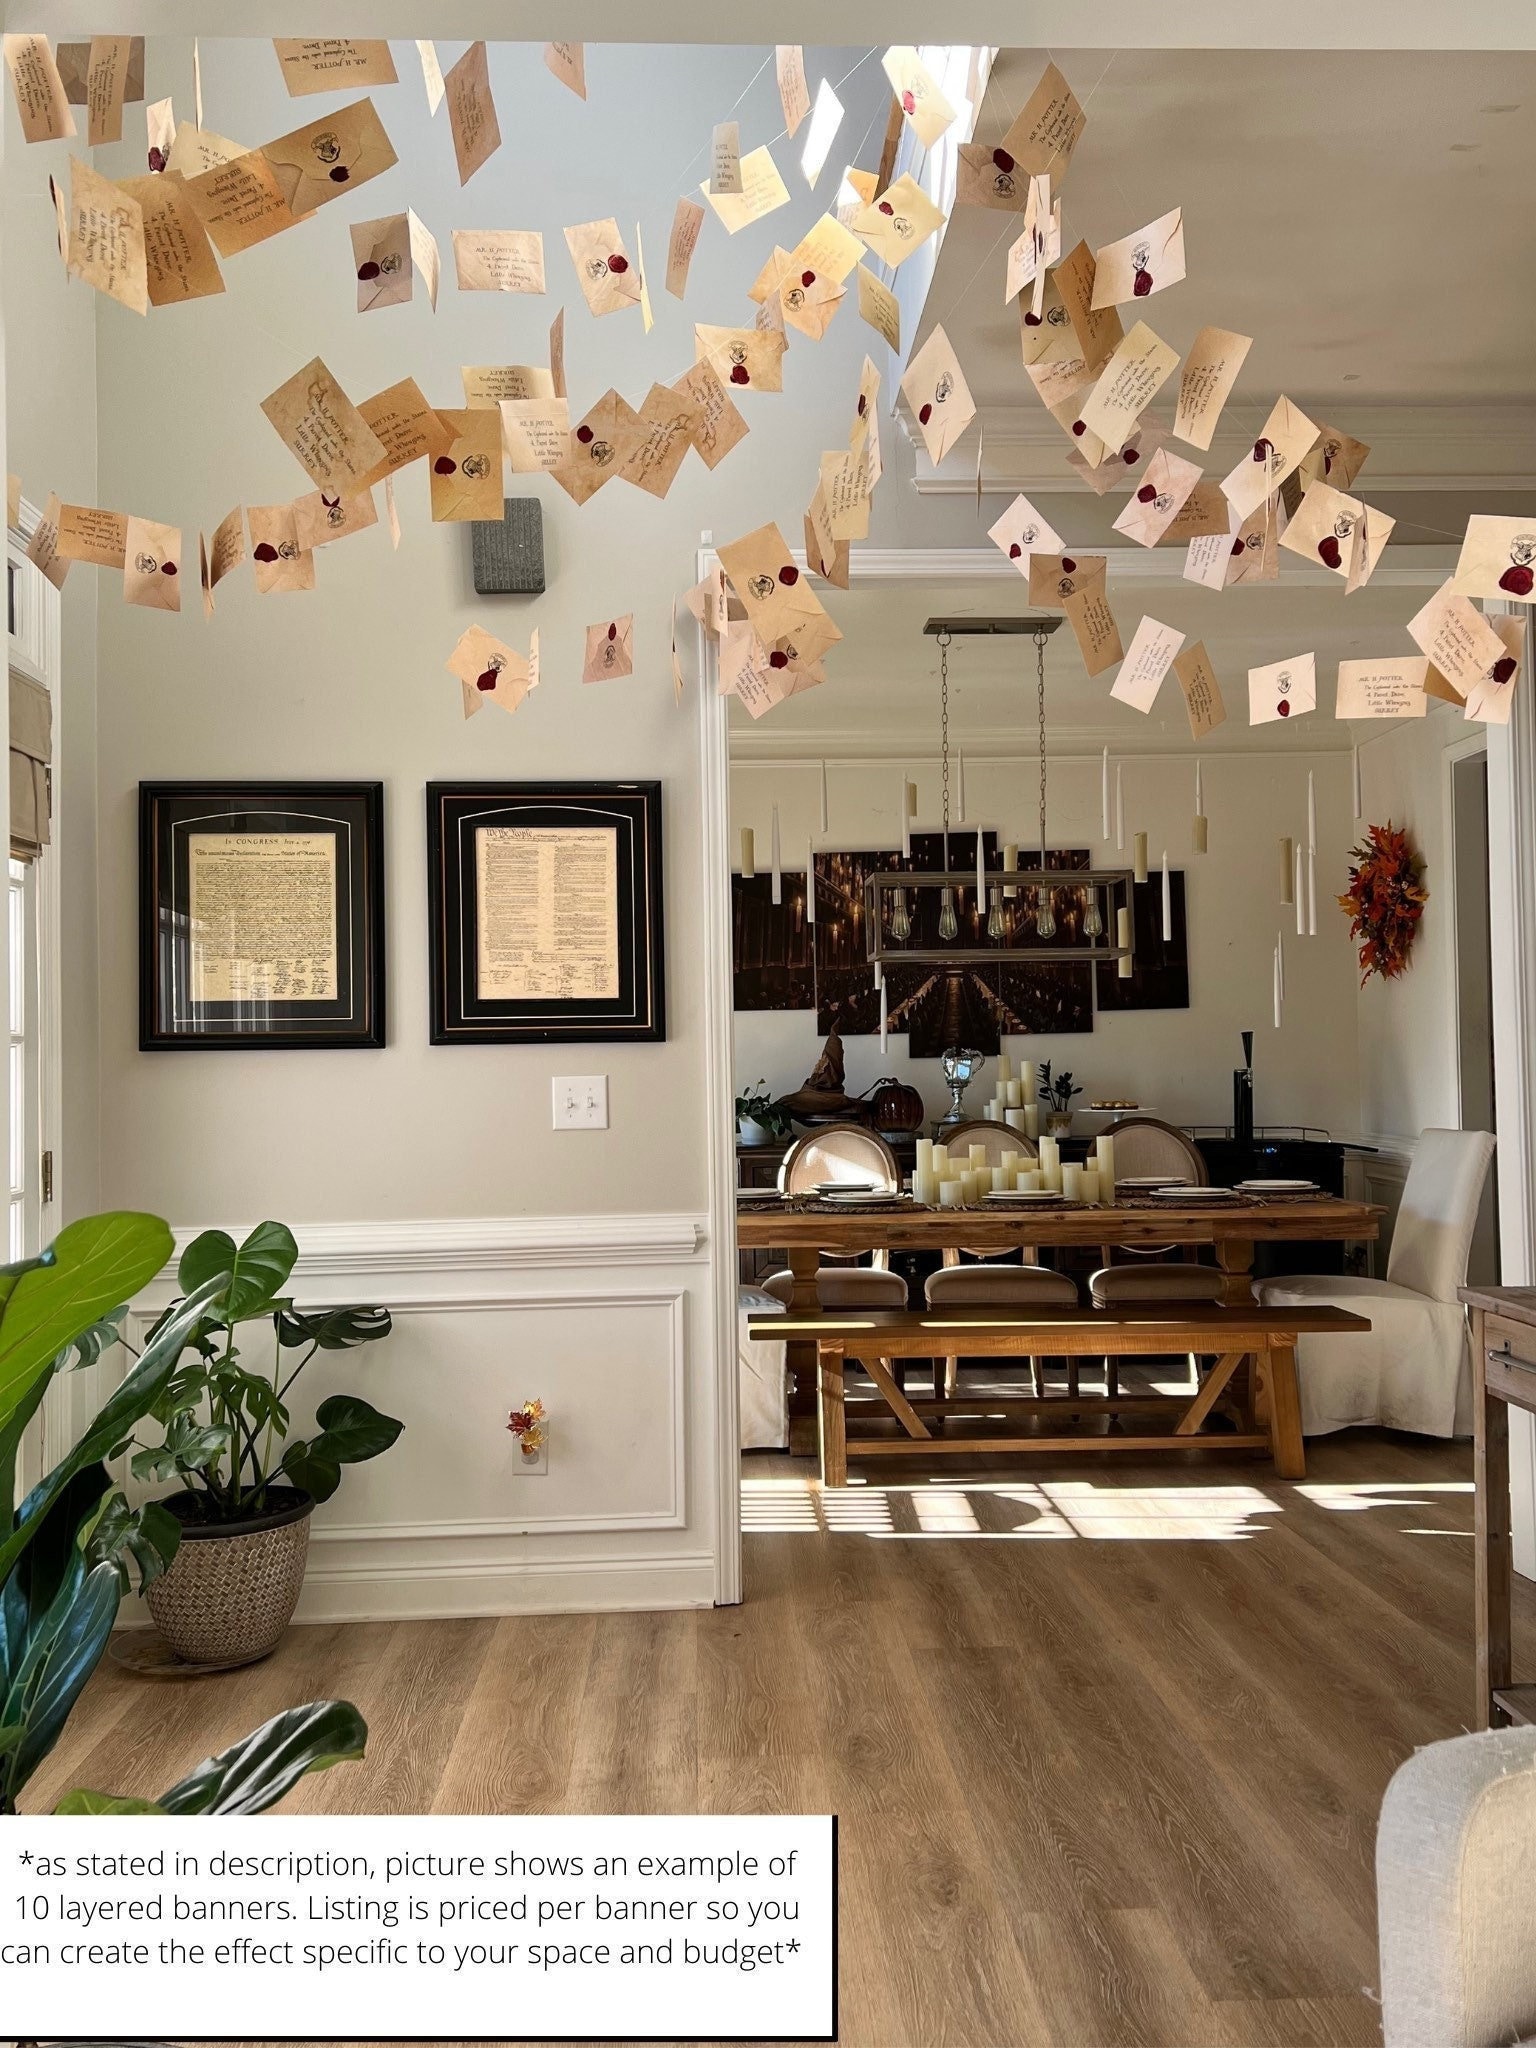 DIY Harry Potter Flying Letters and Halloween Room Decor